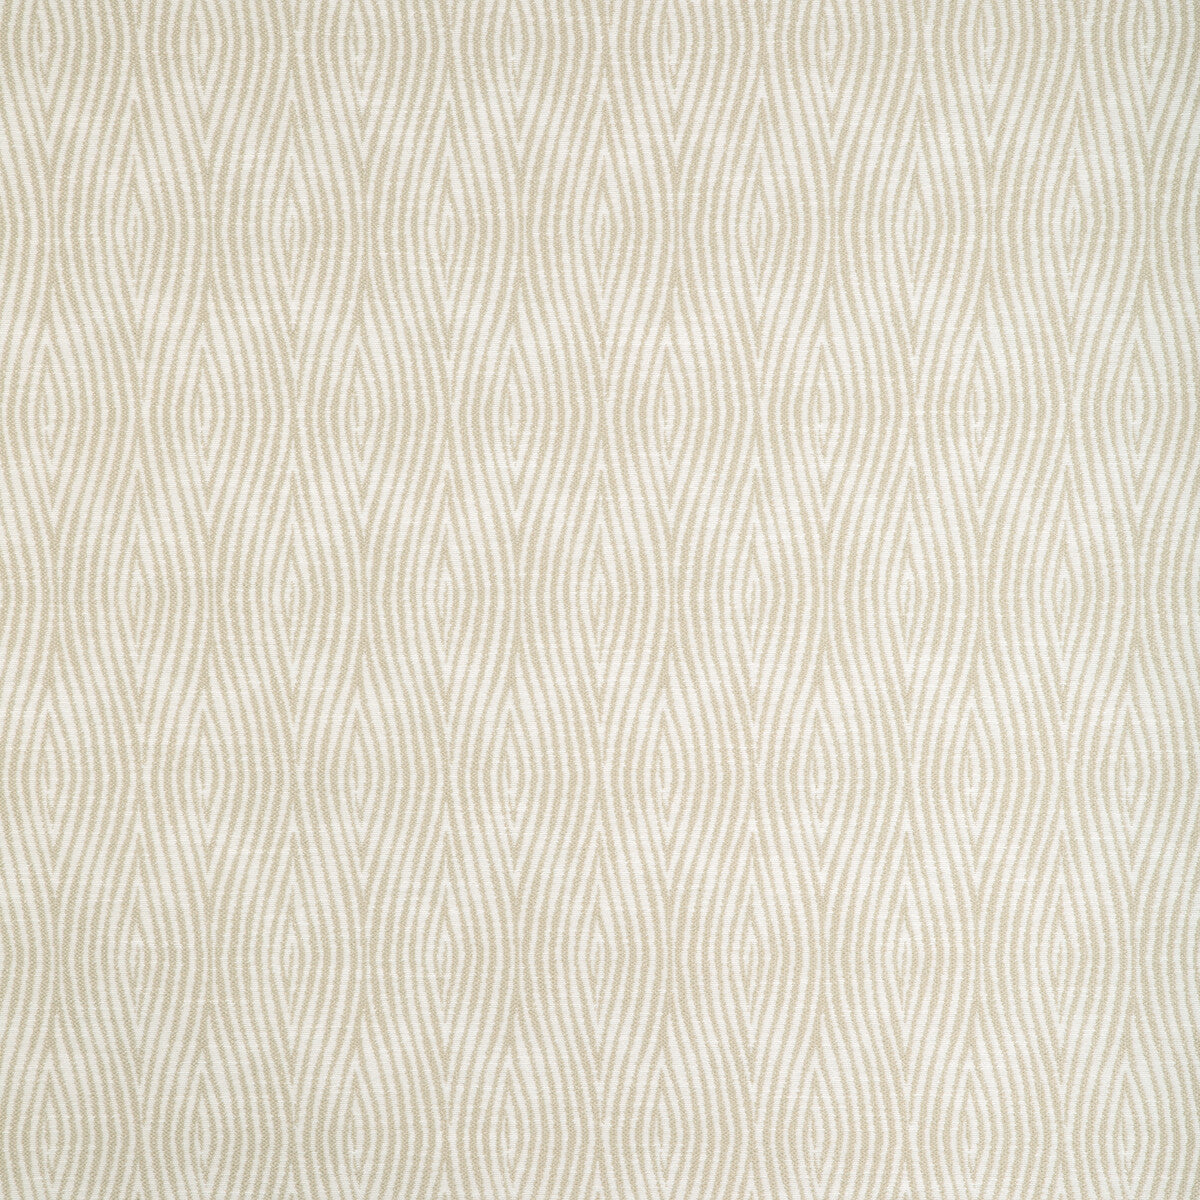 Vertical Motion fabric in chablis color - pattern 37059.16.0 - by Kravet Design in the Thom Filicia Latitude collection